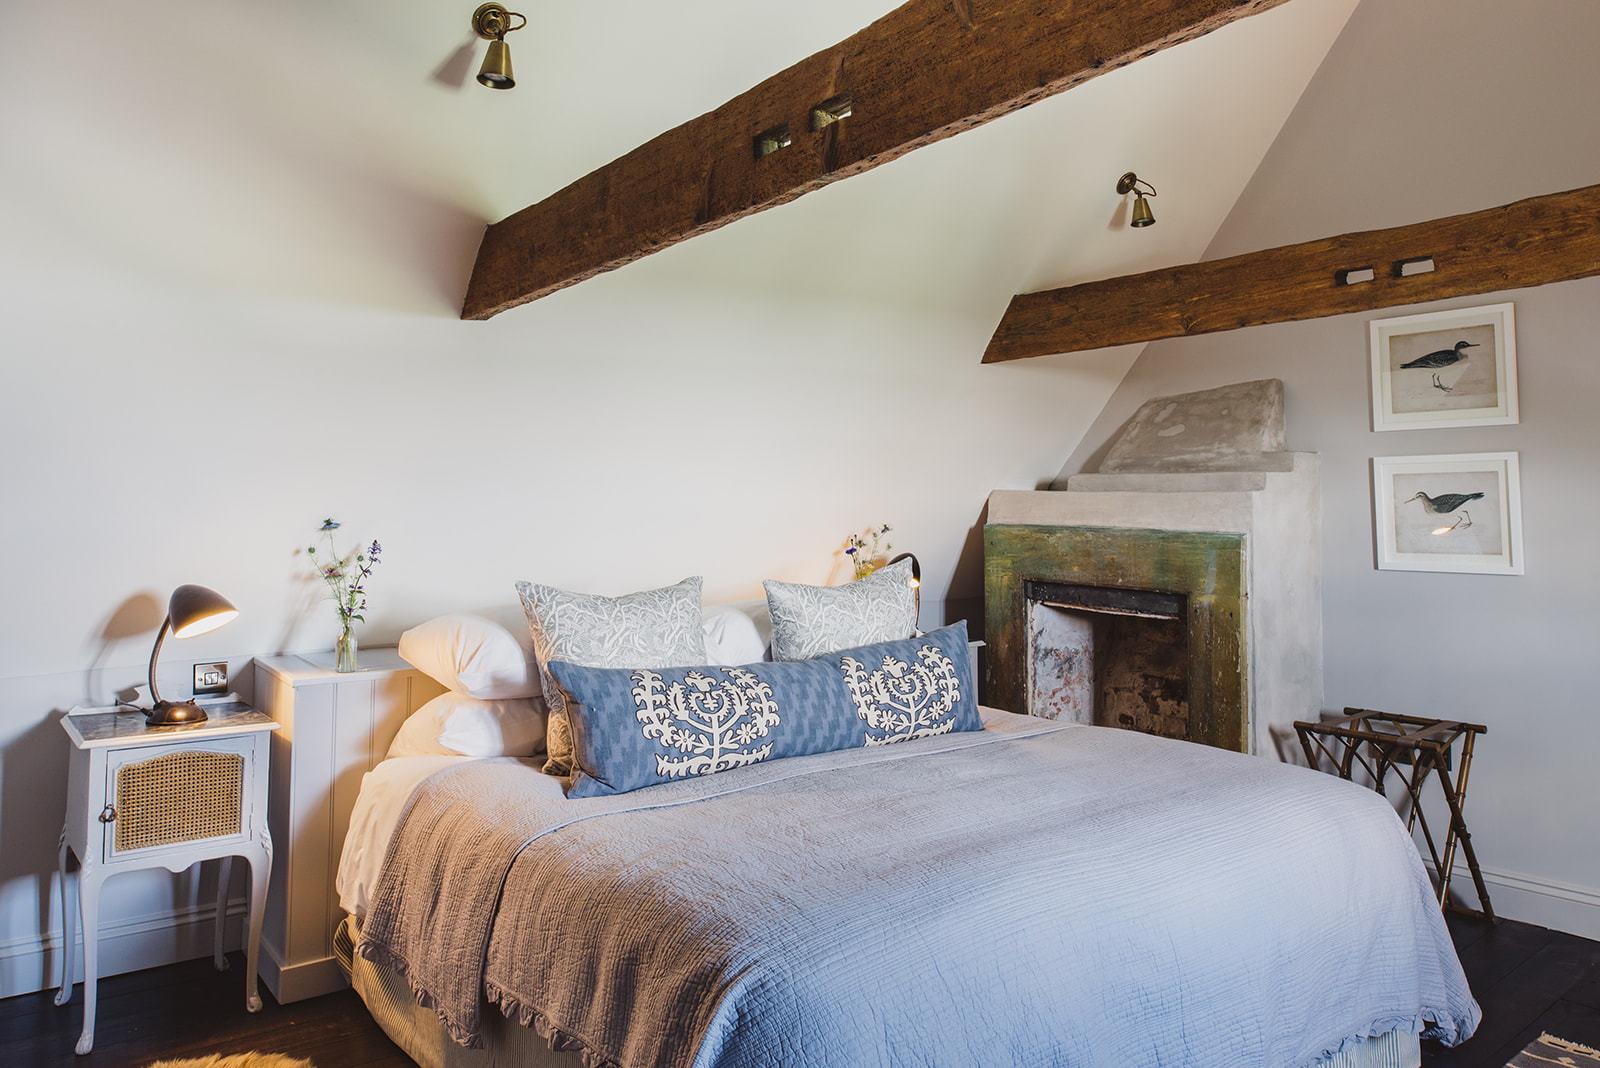 The Lookout Kingshill Farmhouse suite with a view boutique hotel getaway